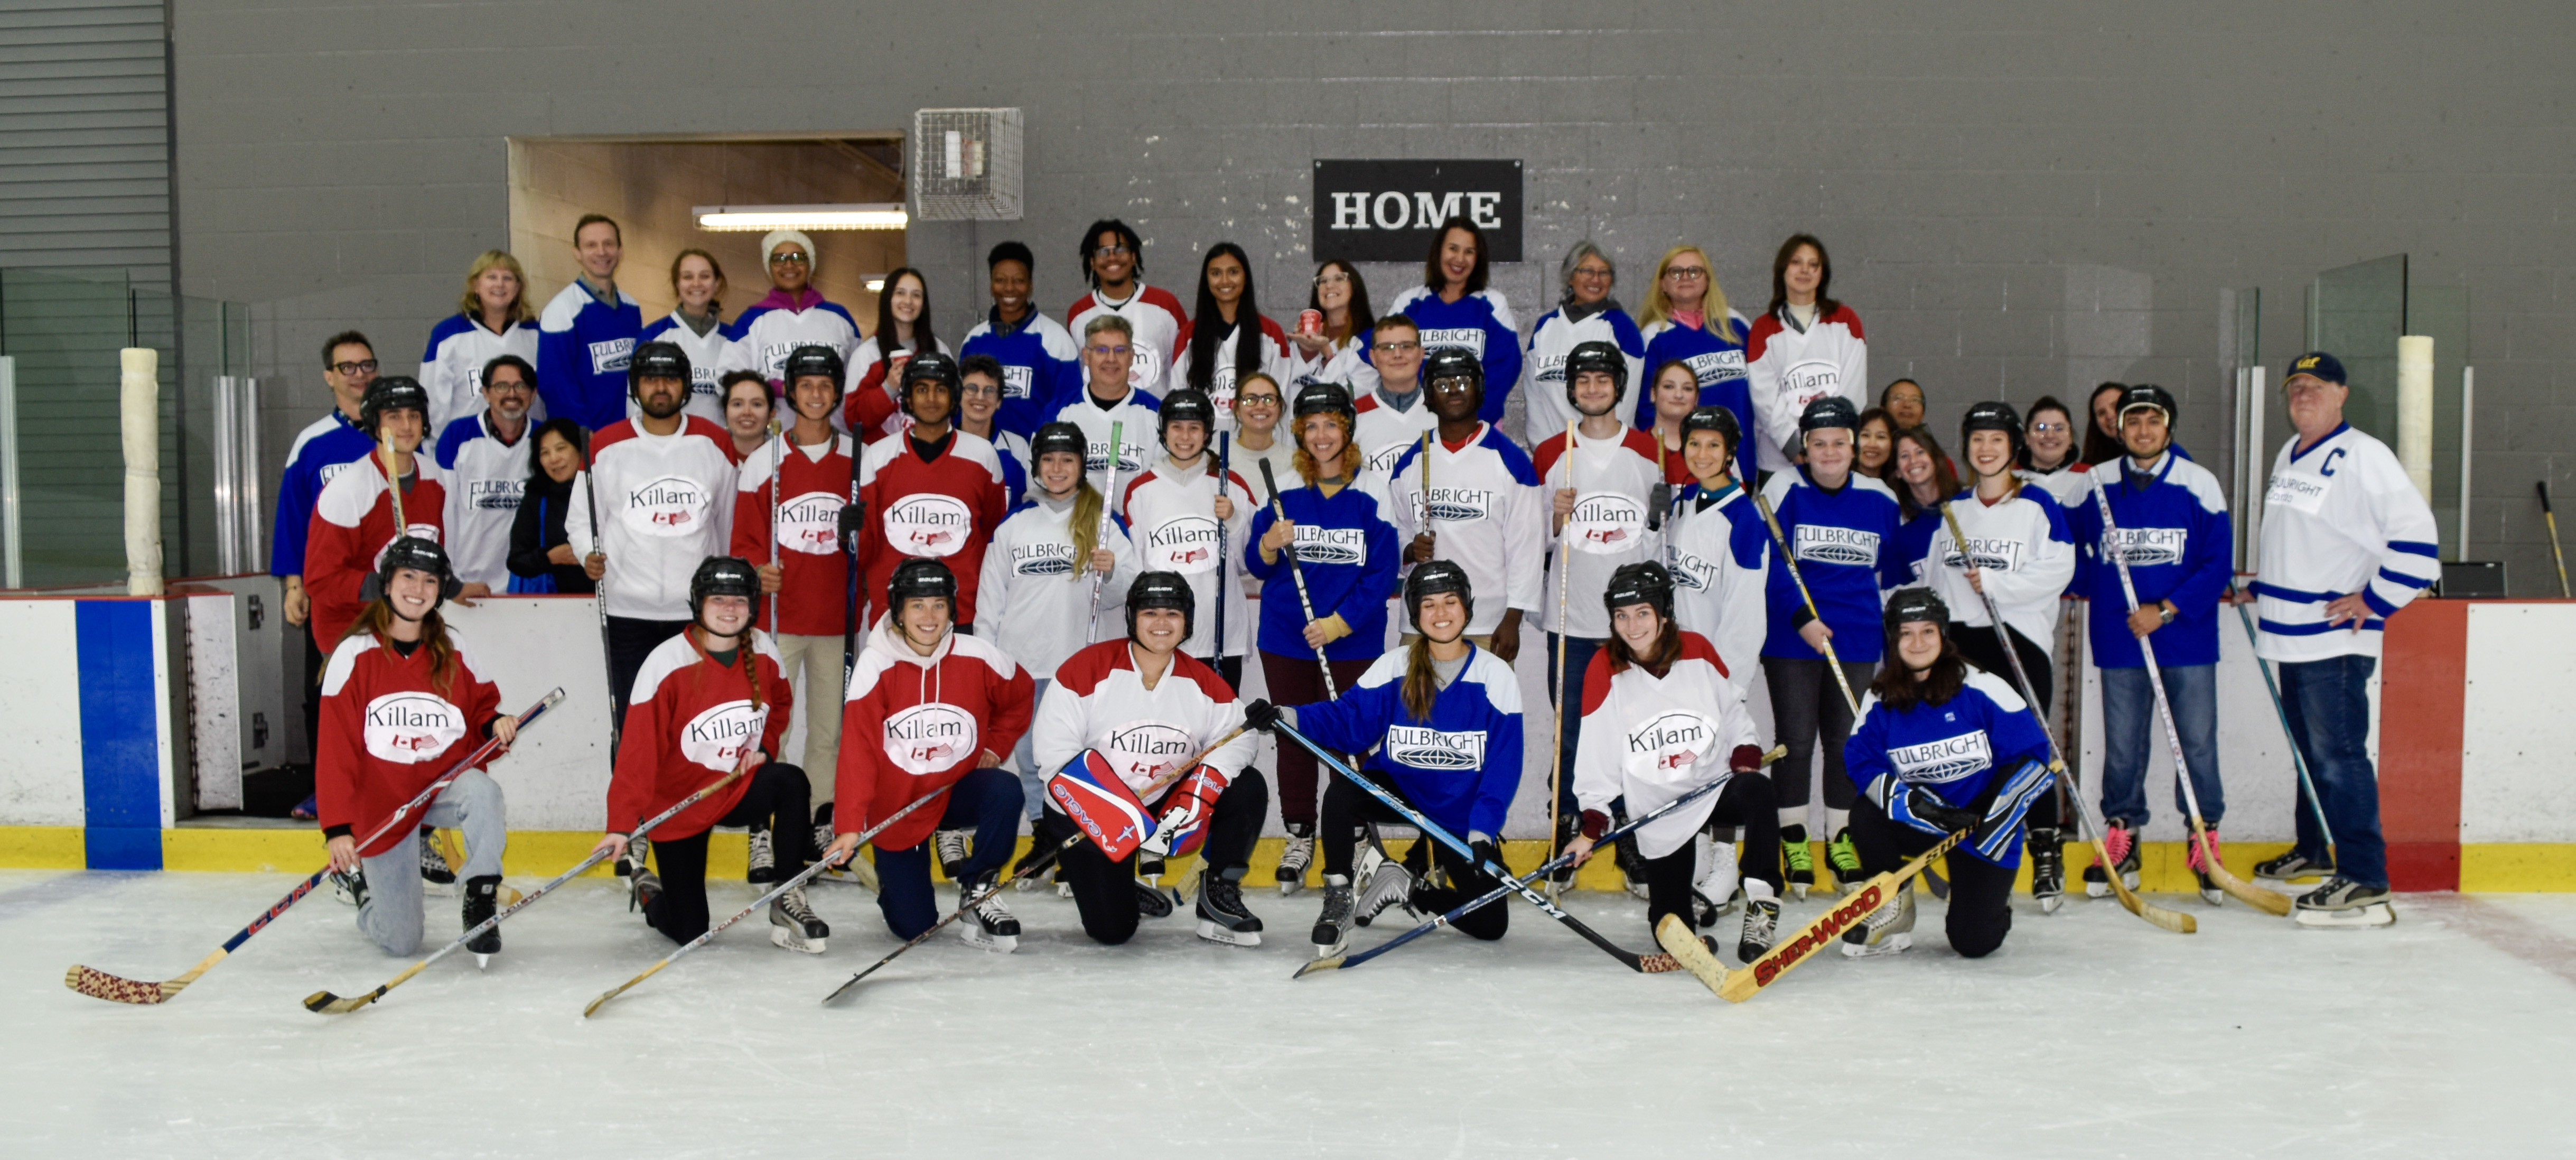 A grantee poses with their hockey team.